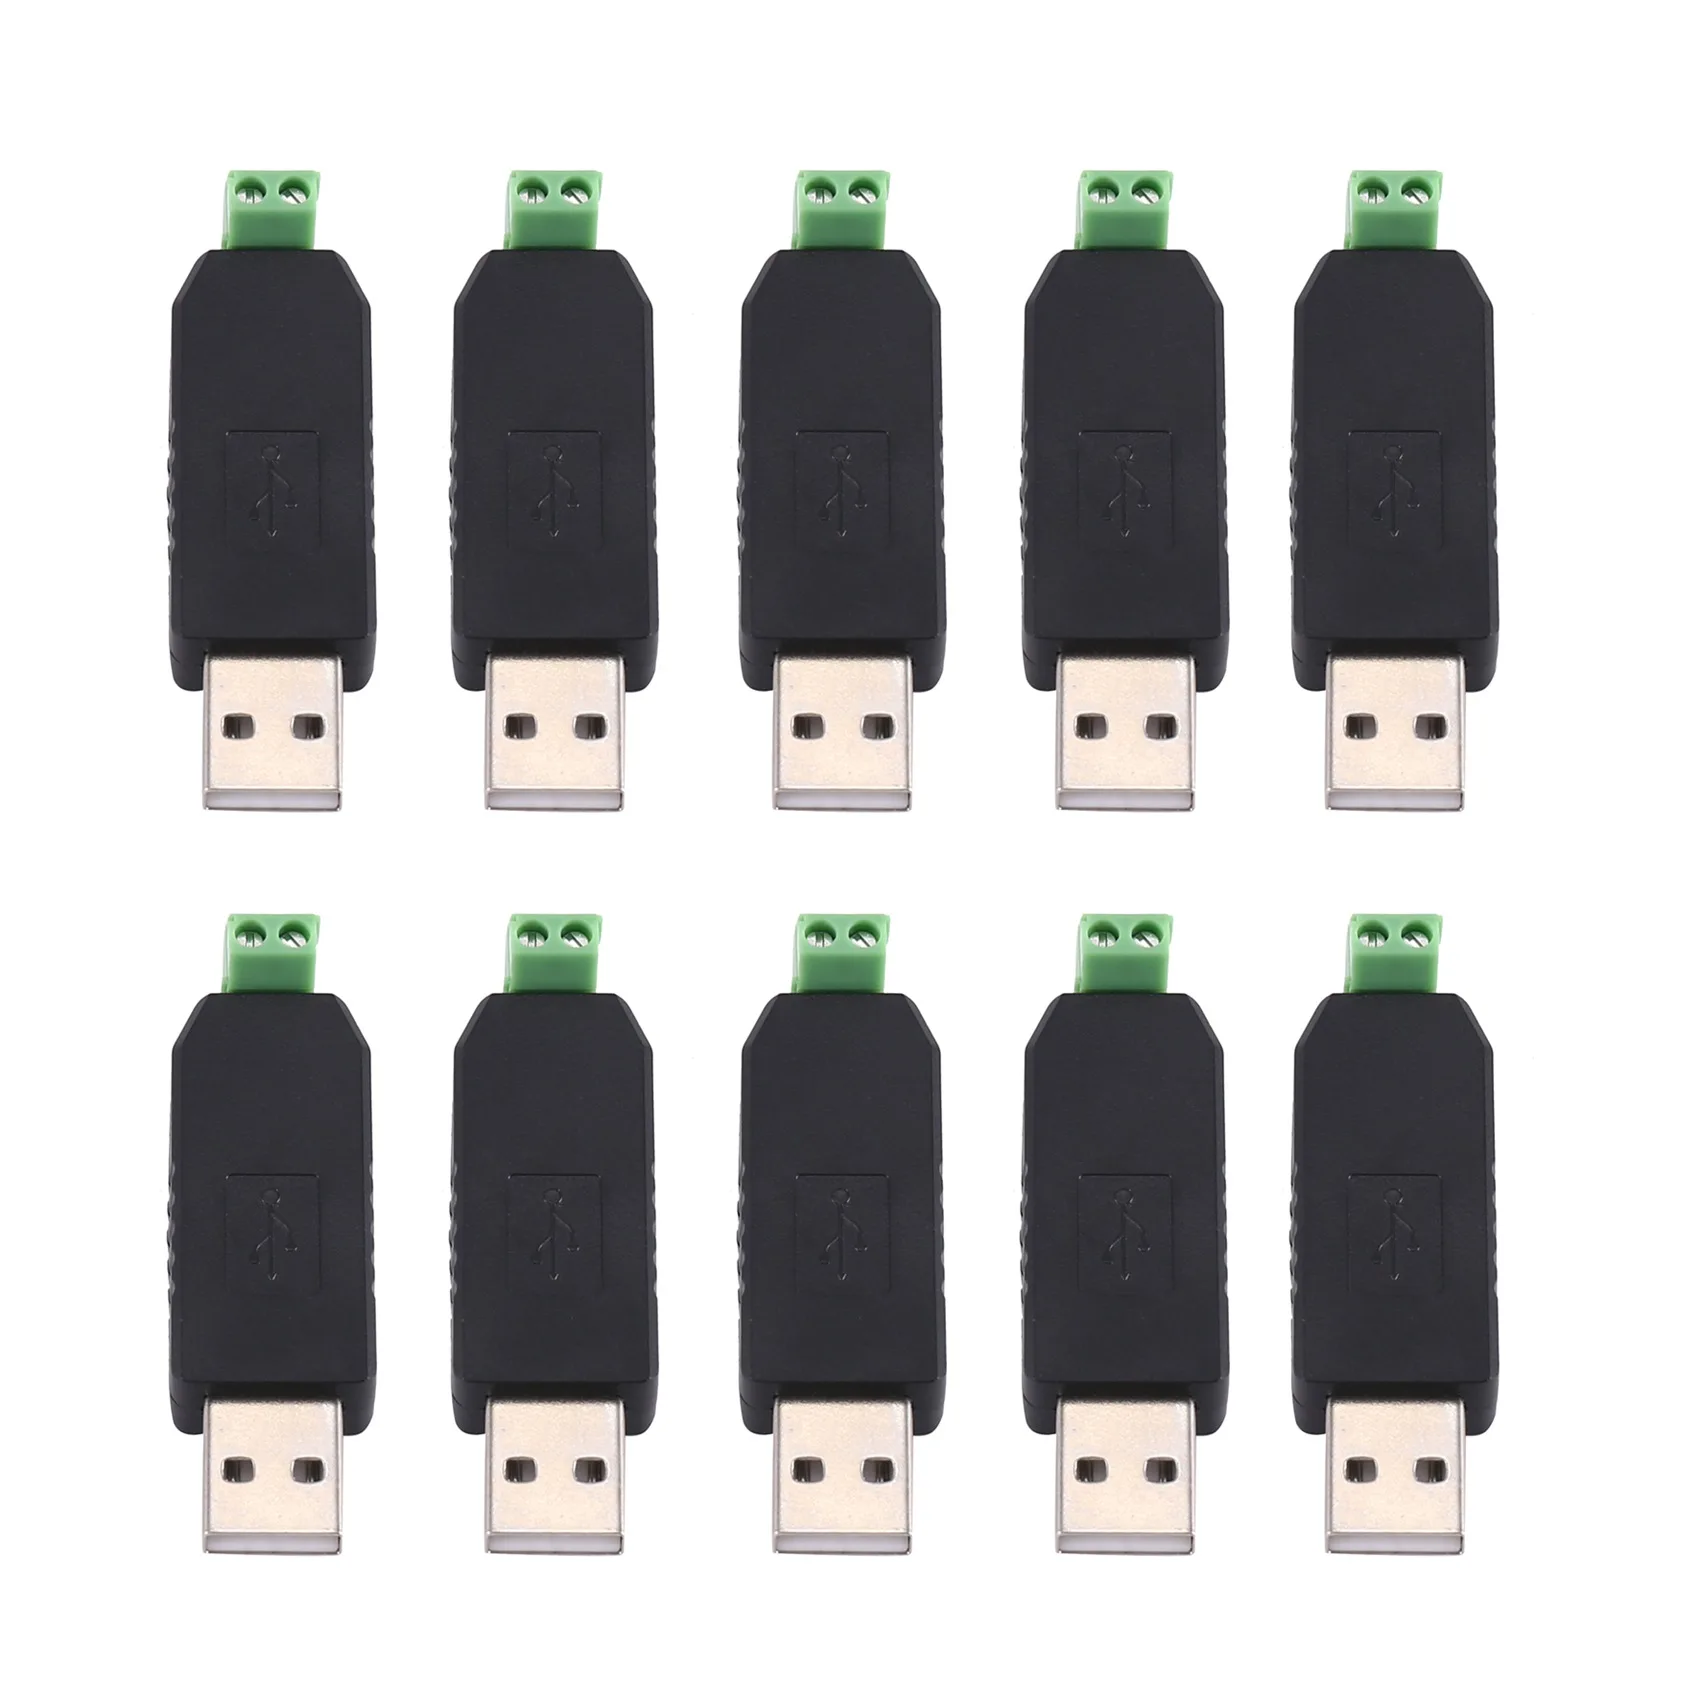 

10 Pcs USB to RS485 485 Converter Adapter Support for Win7 XP Vista Linux - OS WinCE5.0